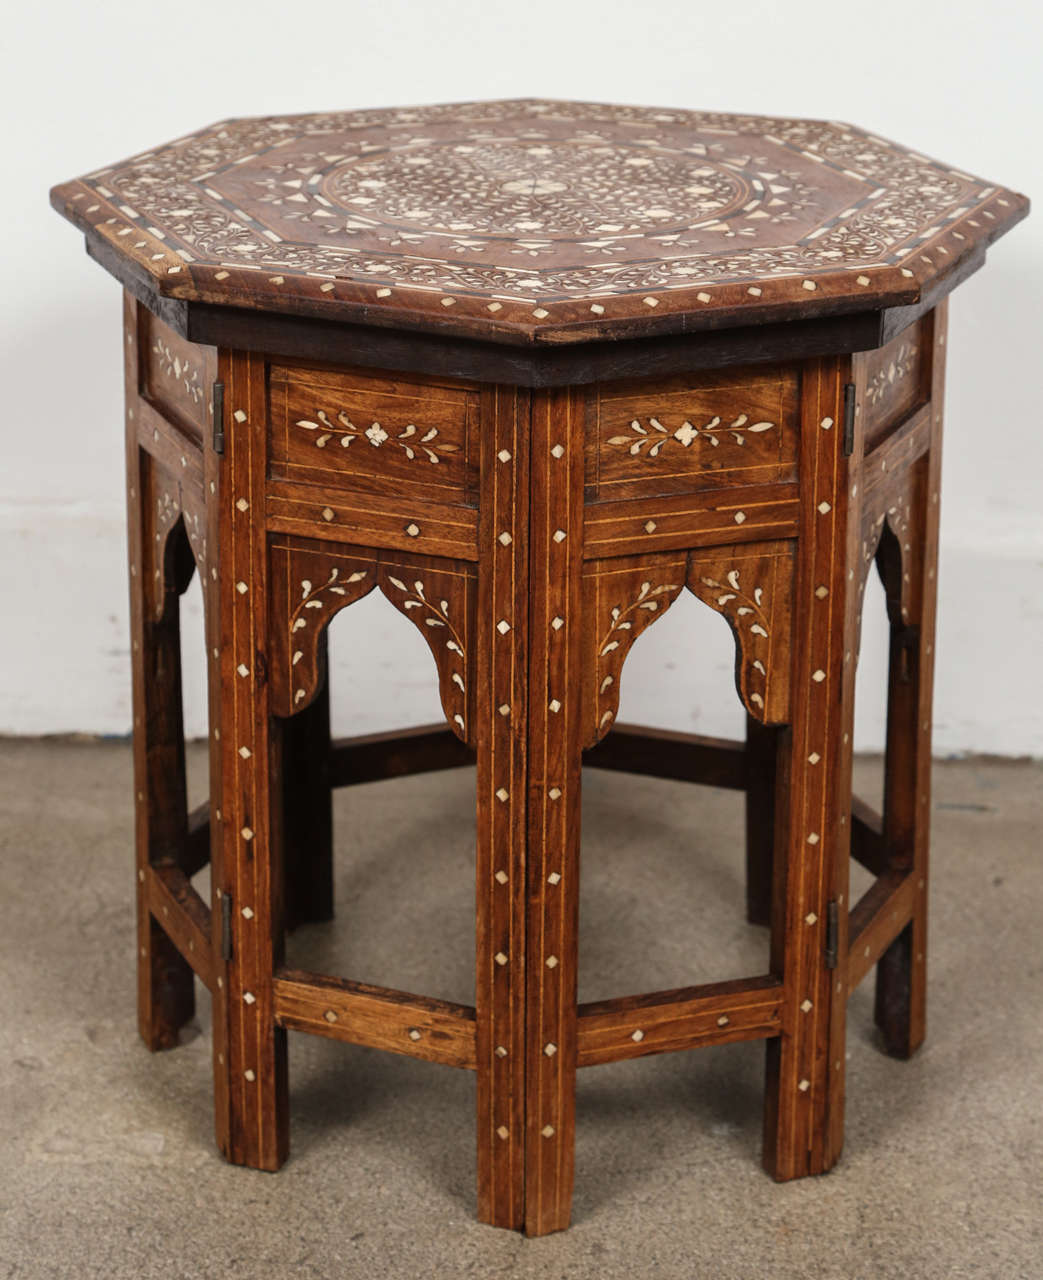 Anglo Indian folding rosewood bone Inlaid octagonal Side Table.
Fine and elegant Anglo-Indian octagonal rosewood table with elaborate bone inlay.The octagonal surface is finely carved and inlaid with bone details designs. The base fold flat.